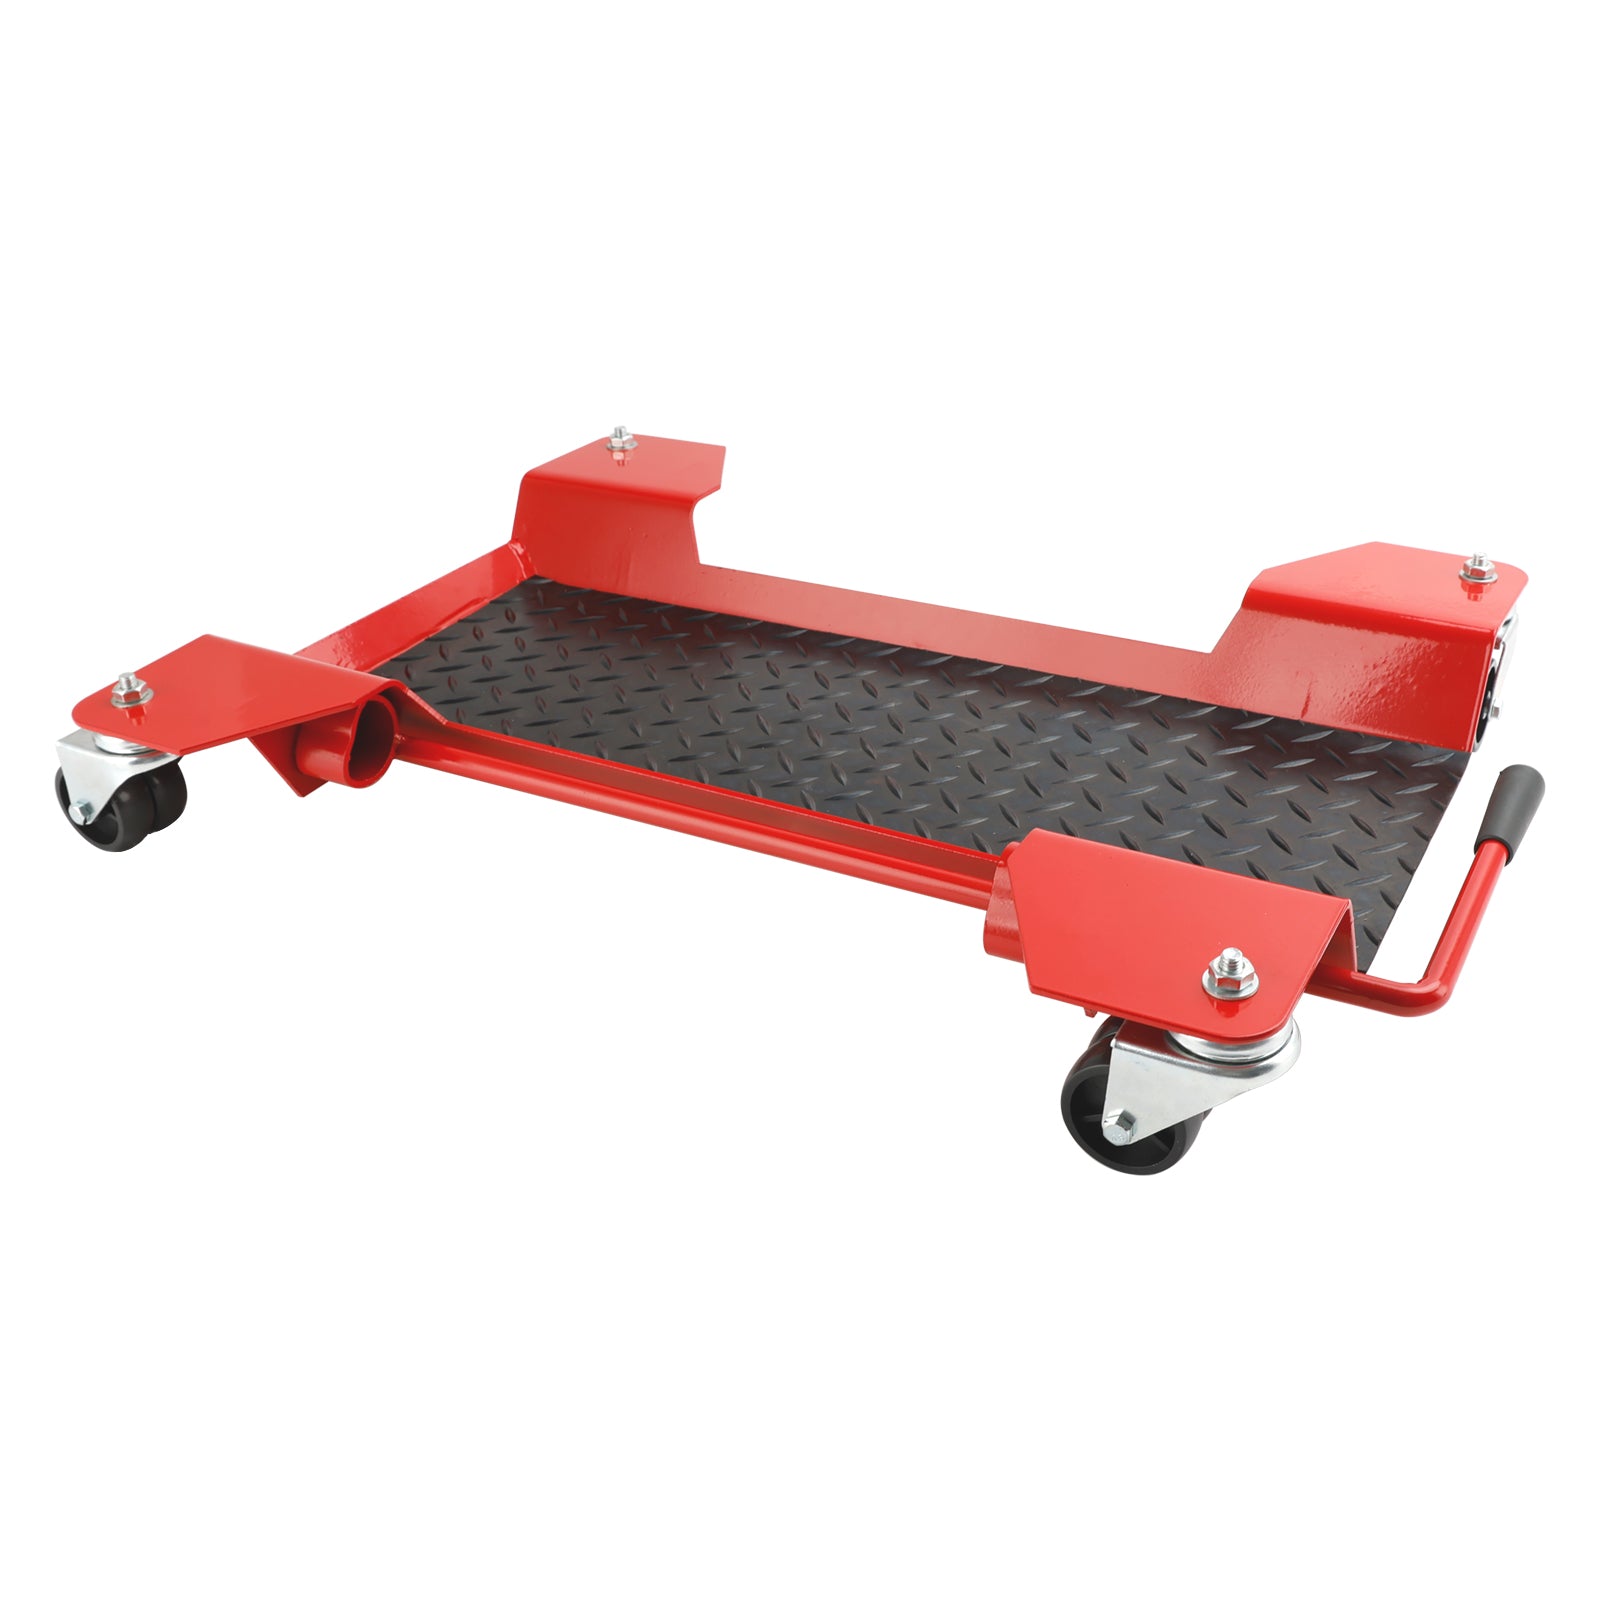 Motorcycle Centre Stand Moving Dolly Trolley Platform 360 Degree Casters 250kg